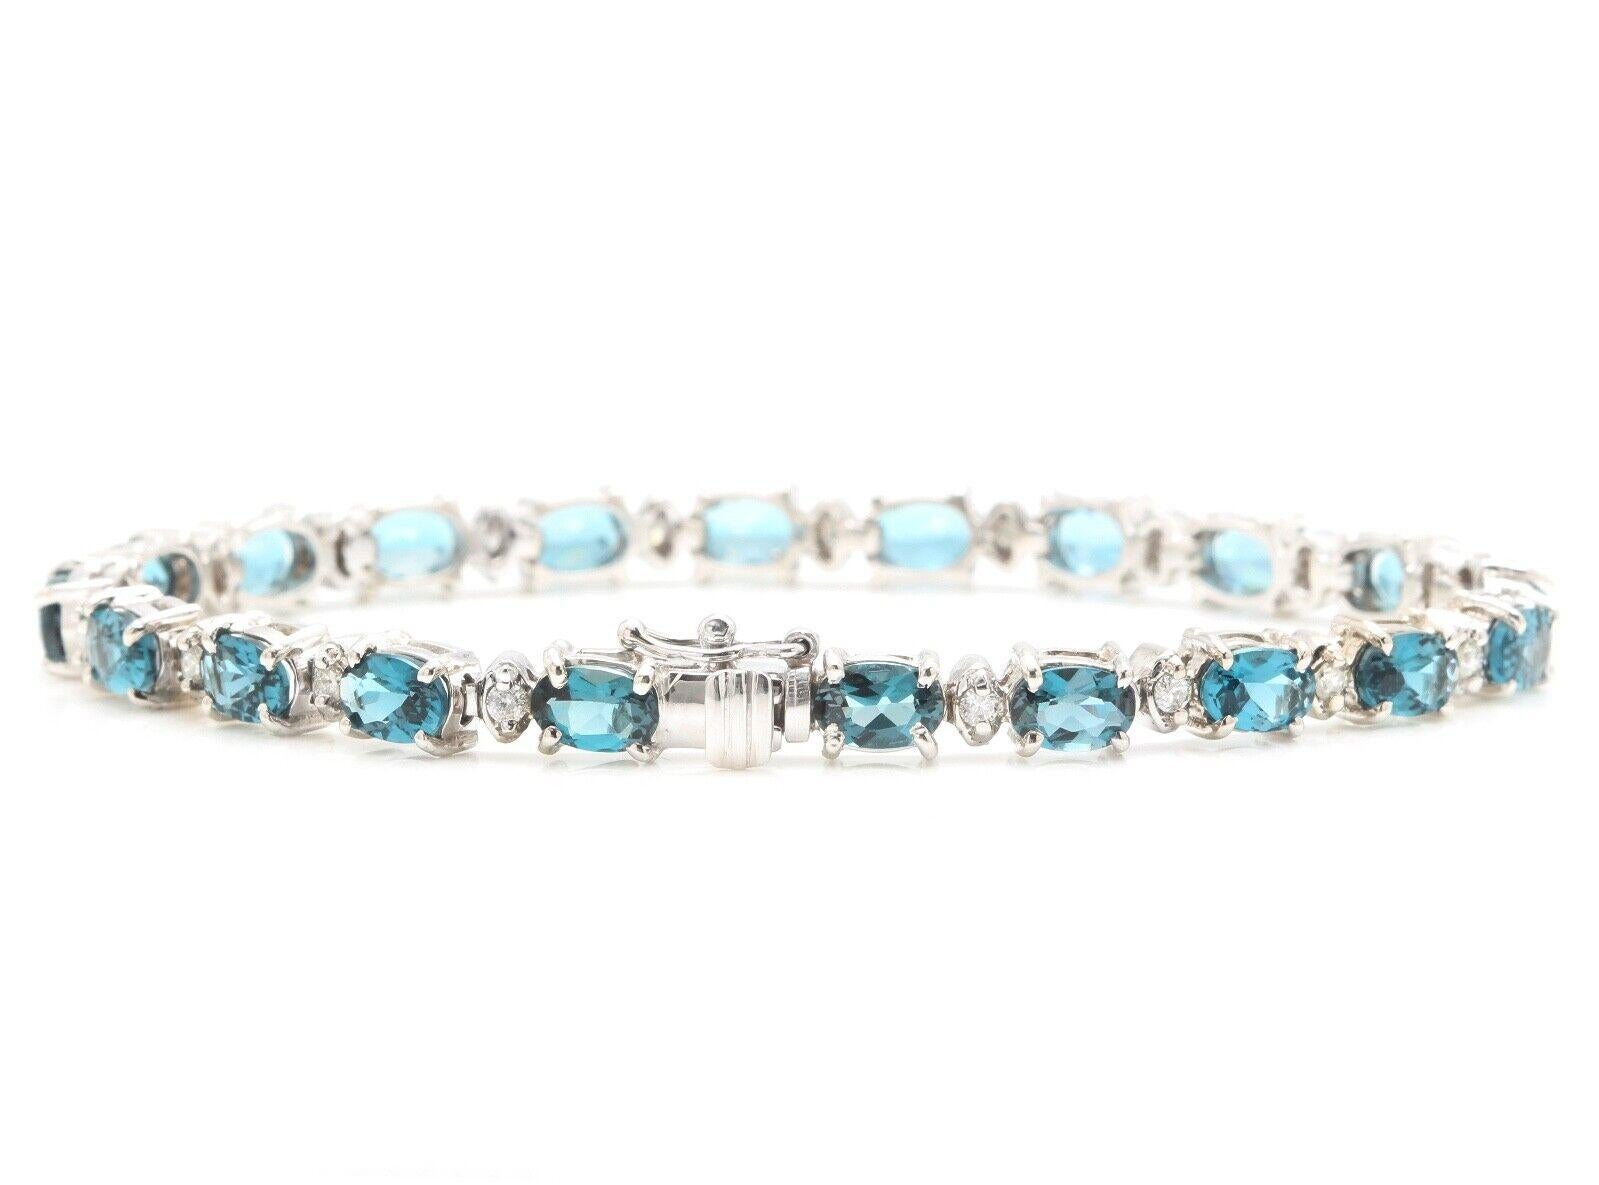 12.70 Carats Natural London Blue Topaz & Diamond 14K Solid White Gold Bracelet 

Suggested Replacement Value: $7,000.00

STAMPED: 14K

Total Natural Round Diamonds Weight: Approx. 0.70 Carats (color G-H / Clarity SI)

Total Natural Topaz Weight is: